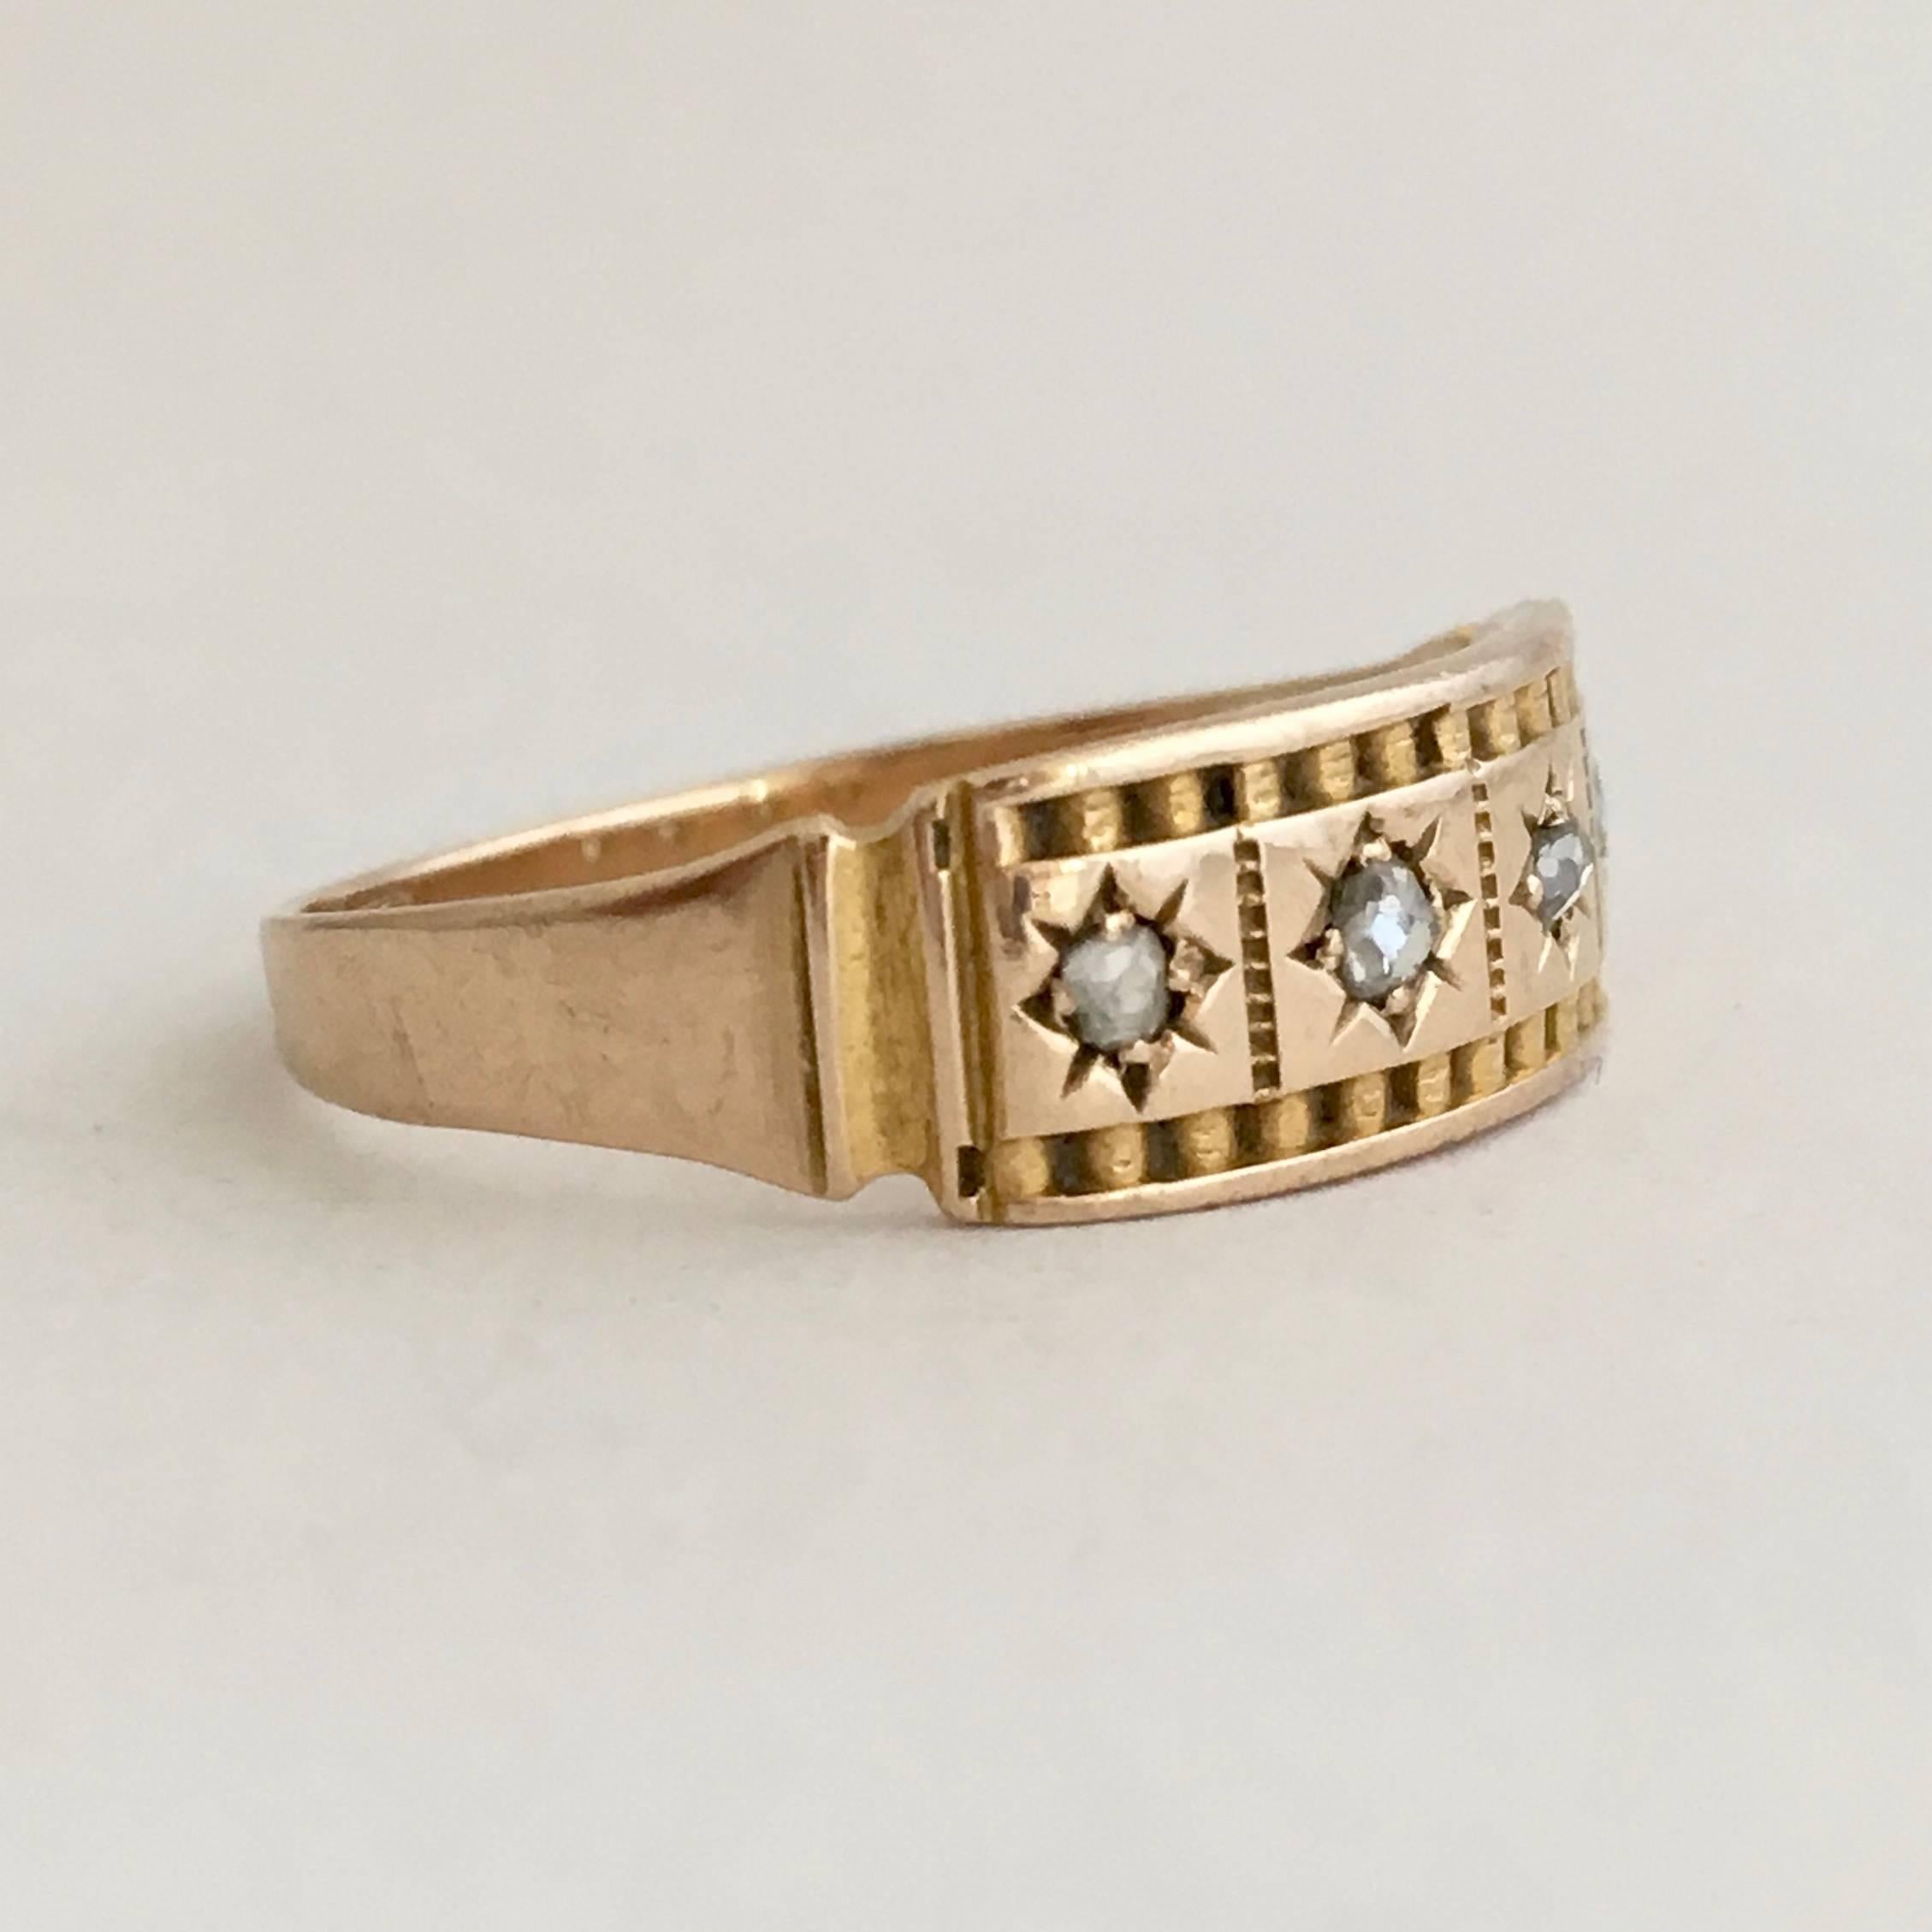 This stylish Victorian ring has a pleasingly contemporary look and feel with its tiny gypsy set diamonds and simple Etruscan revival detailing. The versatile 15ct gold band design looks chic worn alone but could also be stacked with other rings, or